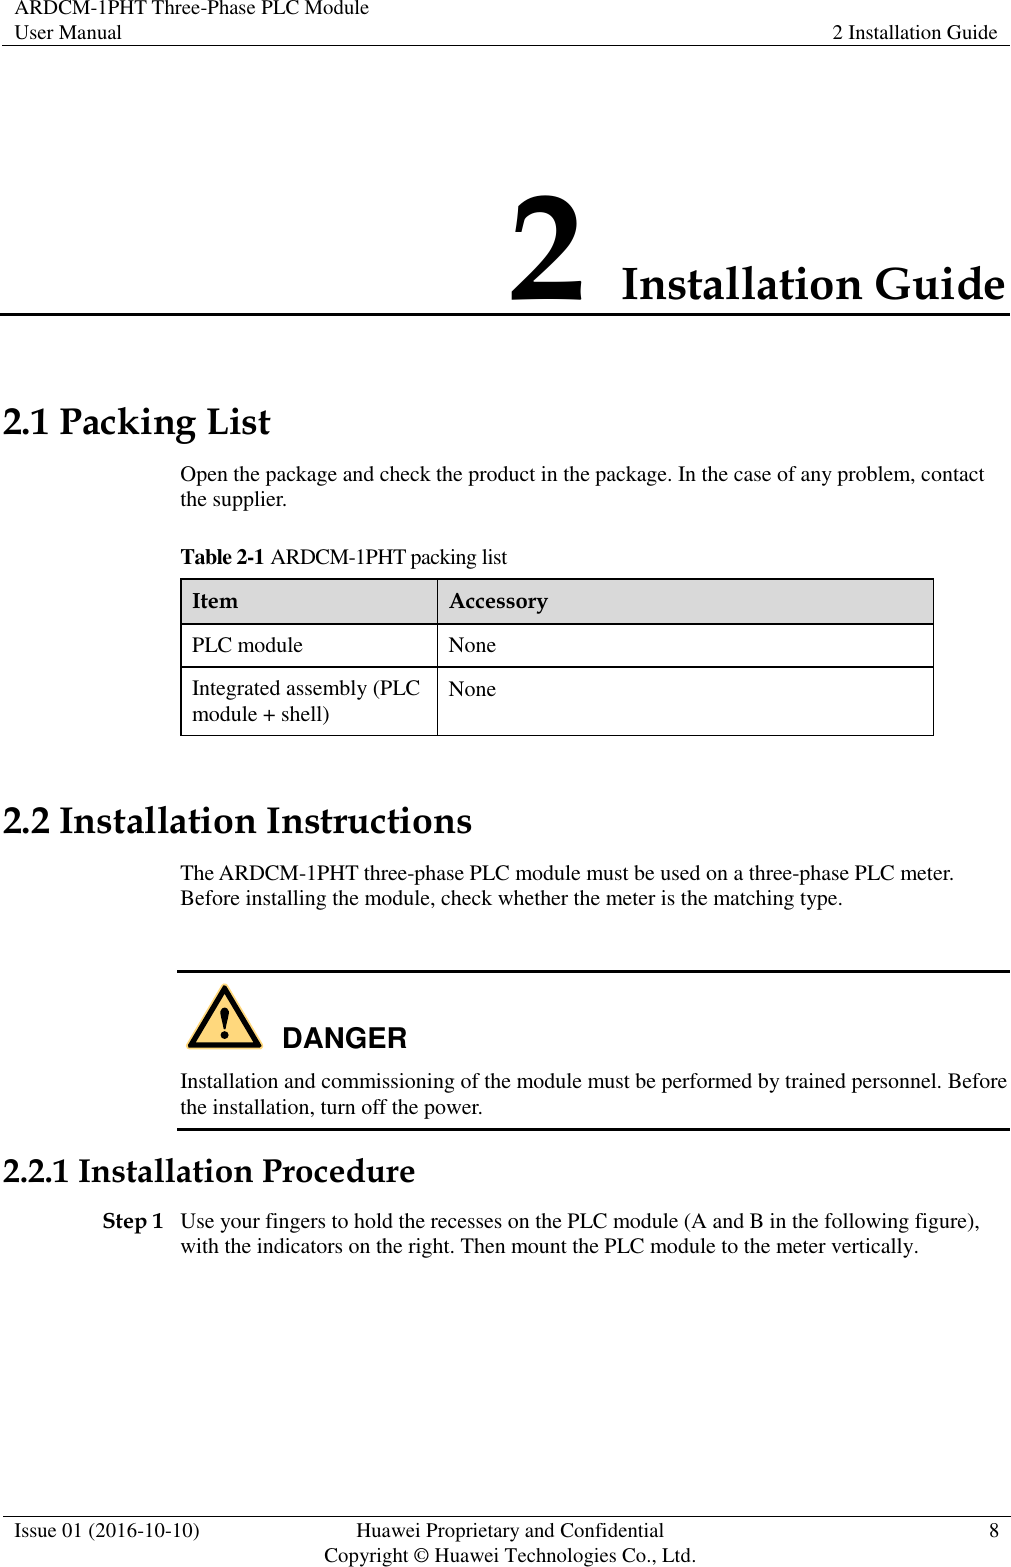 ARDCM-1PHT Three-Phase PLC Module User Manual 2 Installation Guide  Issue 01 (2016-10-10) Huawei Proprietary and Confidential Copyright © Huawei Technologies Co., Ltd. 8  2 Installation Guide 2.1 Packing List Open the package and check the product in the package. In the case of any problem, contact the supplier. Table 2-1 ARDCM-1PHT packing list Item Accessory PLC module None Integrated assembly (PLC module + shell) None 2.2 Installation Instructions The ARDCM-1PHT three-phase PLC module must be used on a three-phase PLC meter. Before installing the module, check whether the meter is the matching type.   Installation and commissioning of the module must be performed by trained personnel. Before the installation, turn off the power. 2.2.1 Installation Procedure Step 1 Use your fingers to hold the recesses on the PLC module (A and B in the following figure), with the indicators on the right. Then mount the PLC module to the meter vertically. DANGER